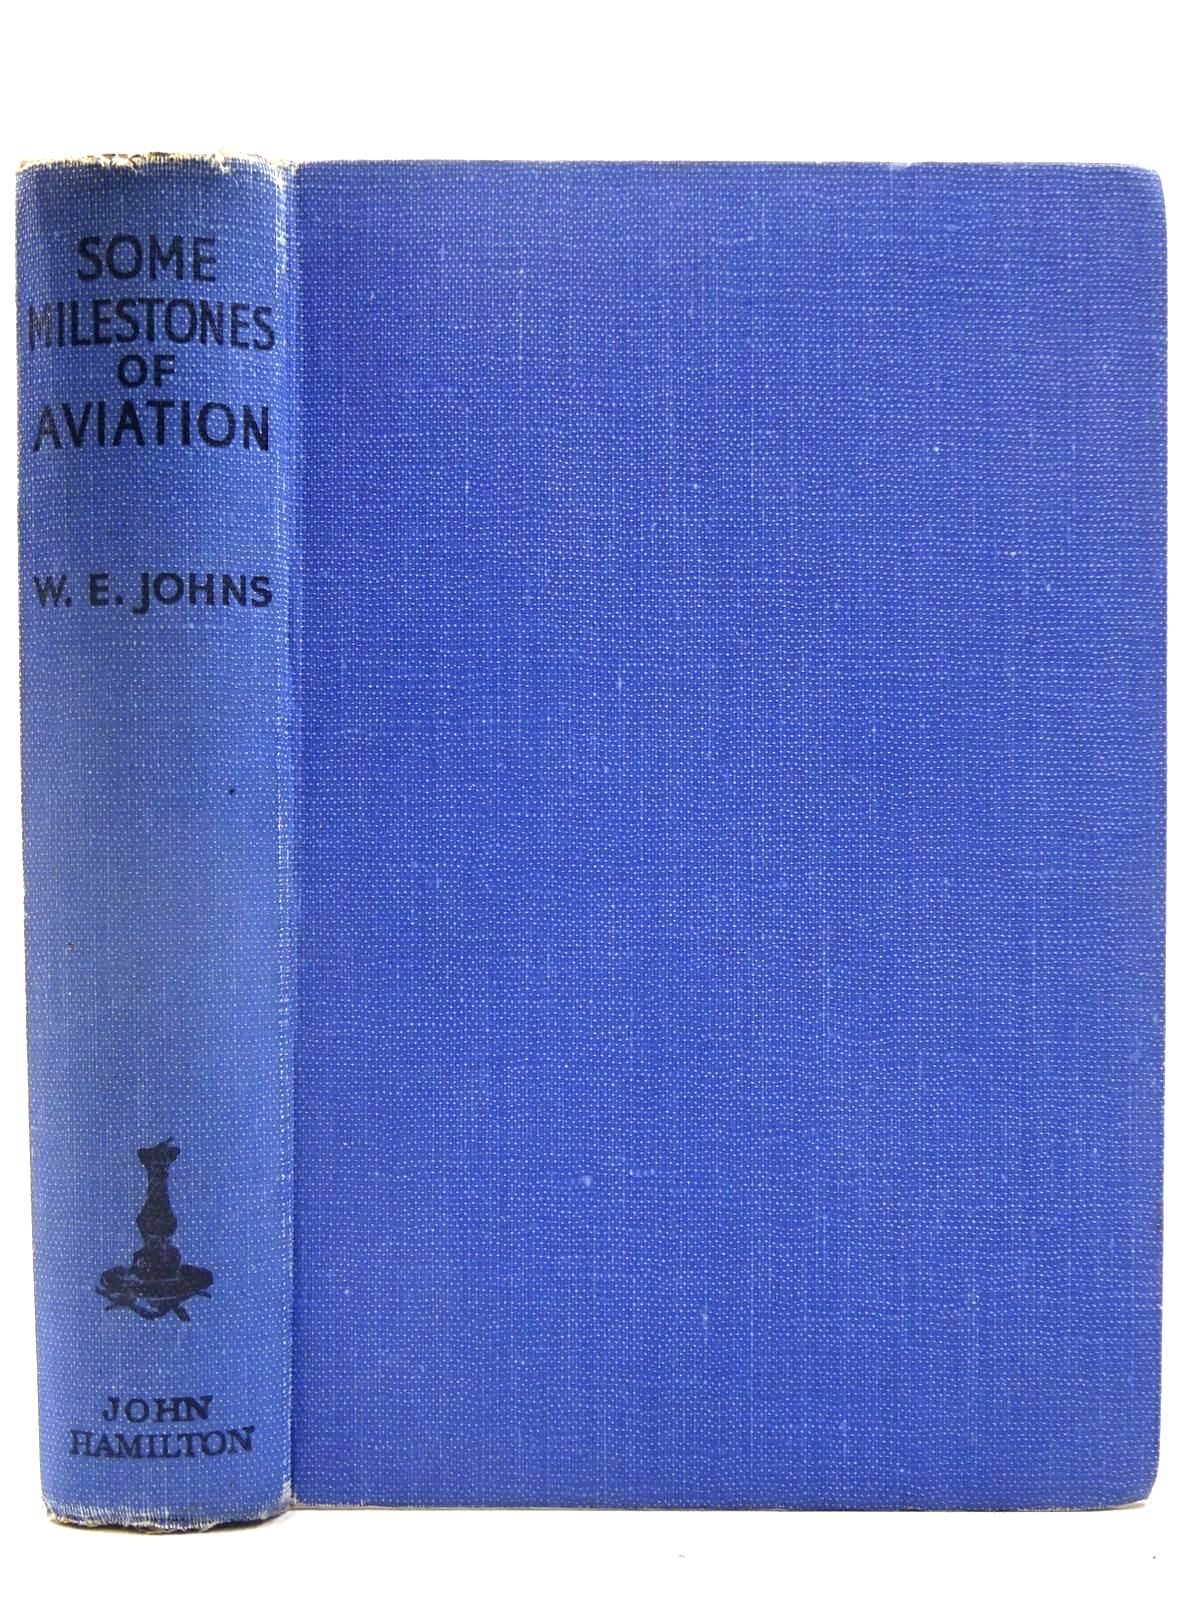 Photo of SOME MILESTONES IN AVIATION written by Johns, W.E. published by John Hamilton (STOCK CODE: 2128221)  for sale by Stella & Rose's Books